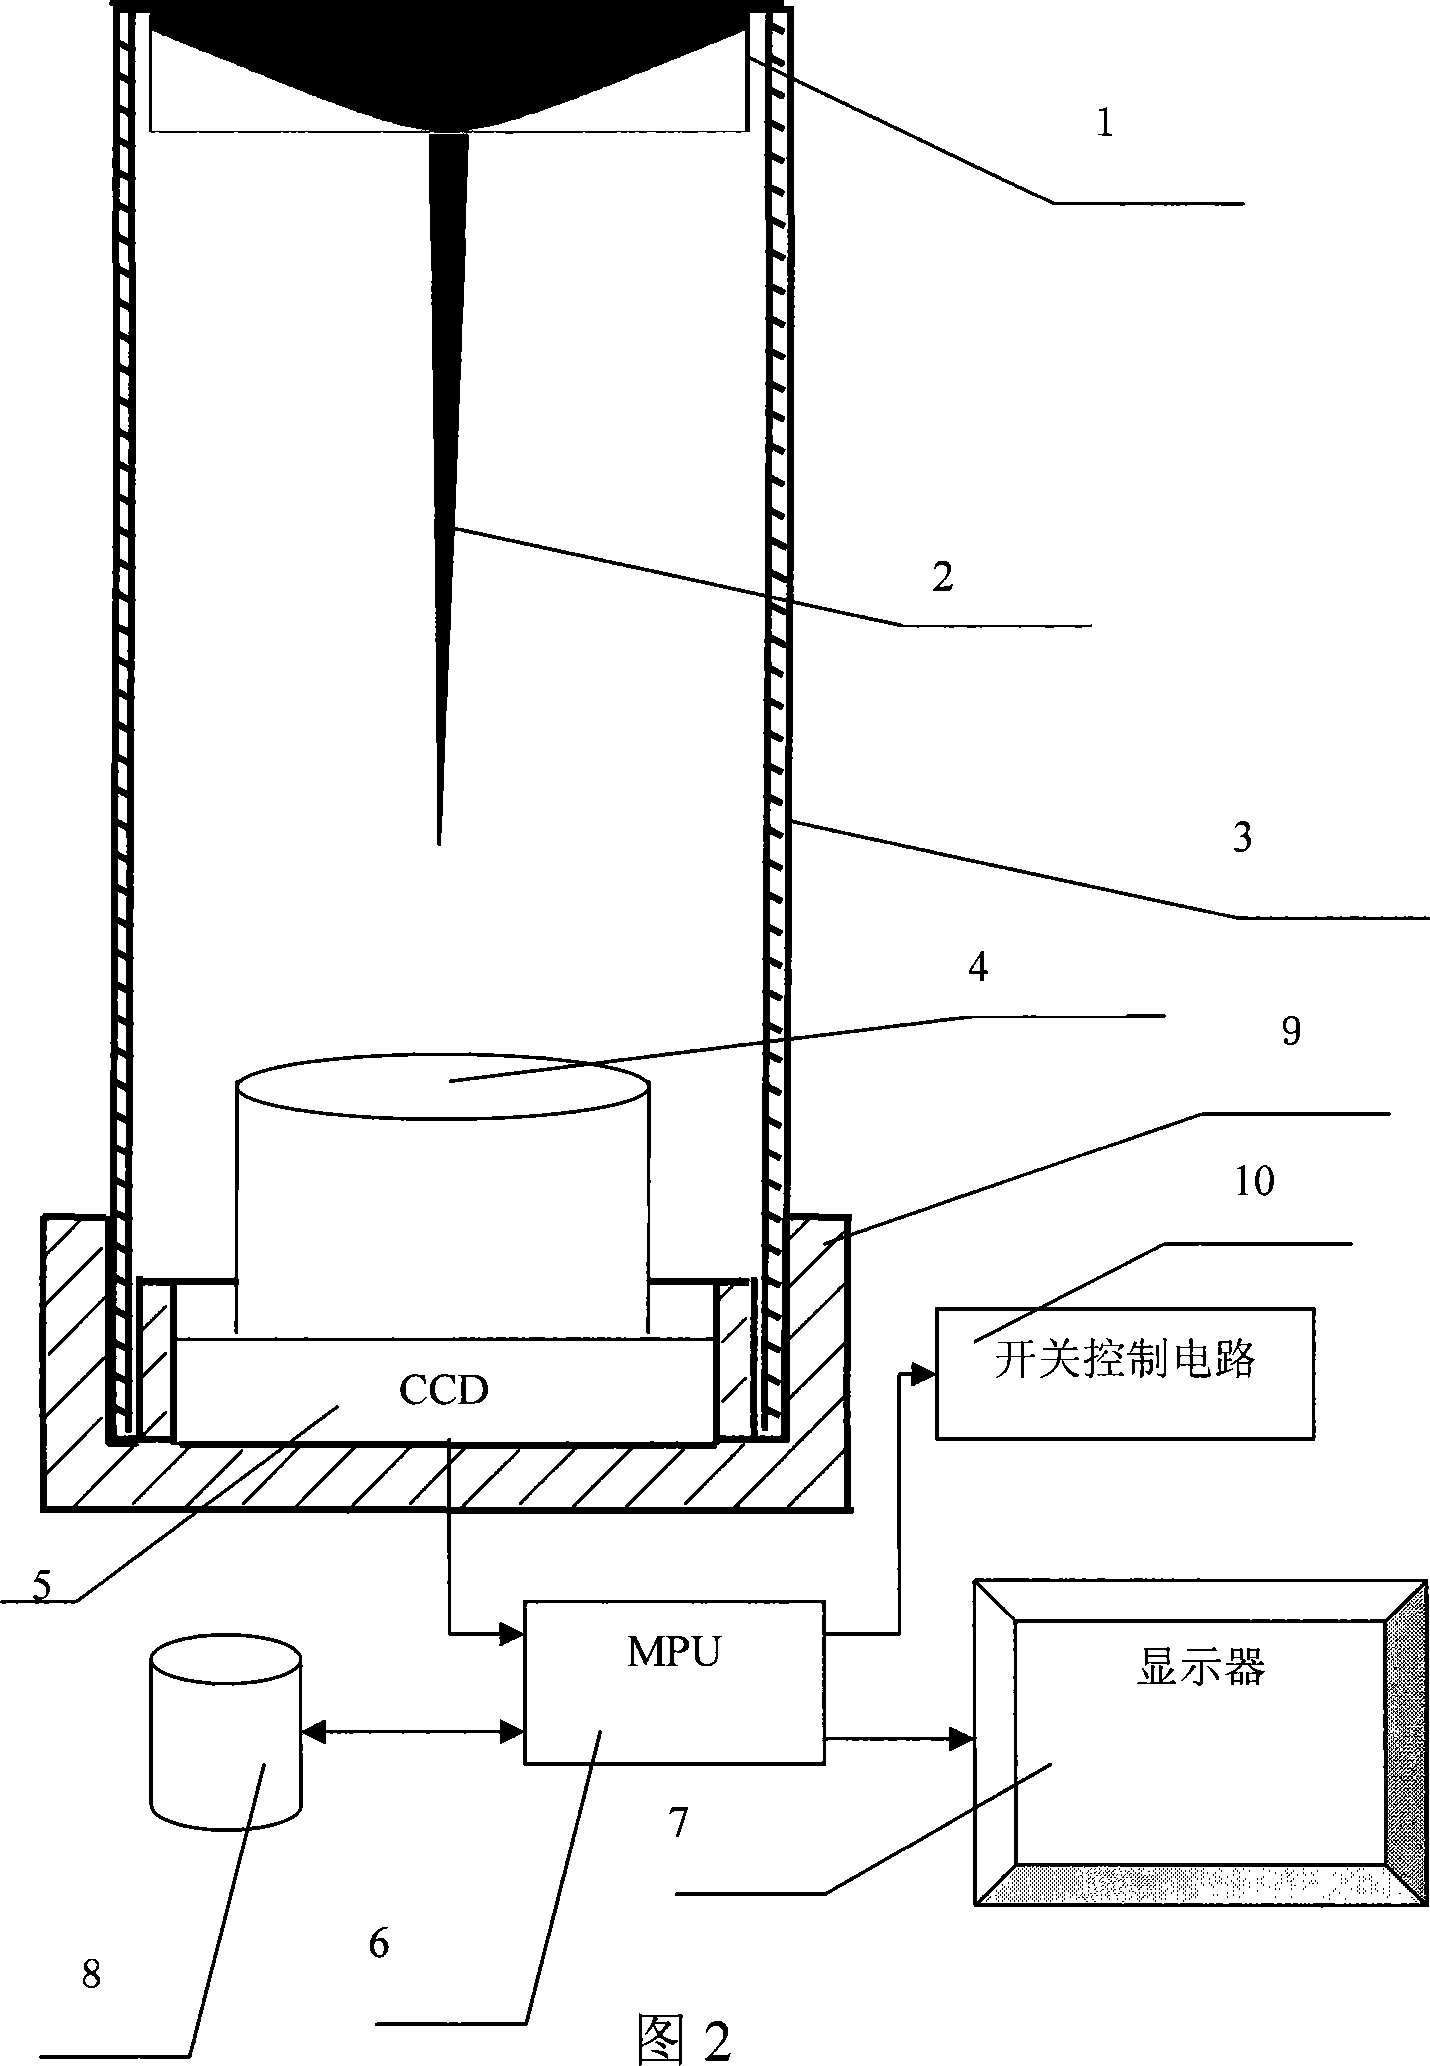 Air conditioner energy saving controller based on omnibearing computer vision